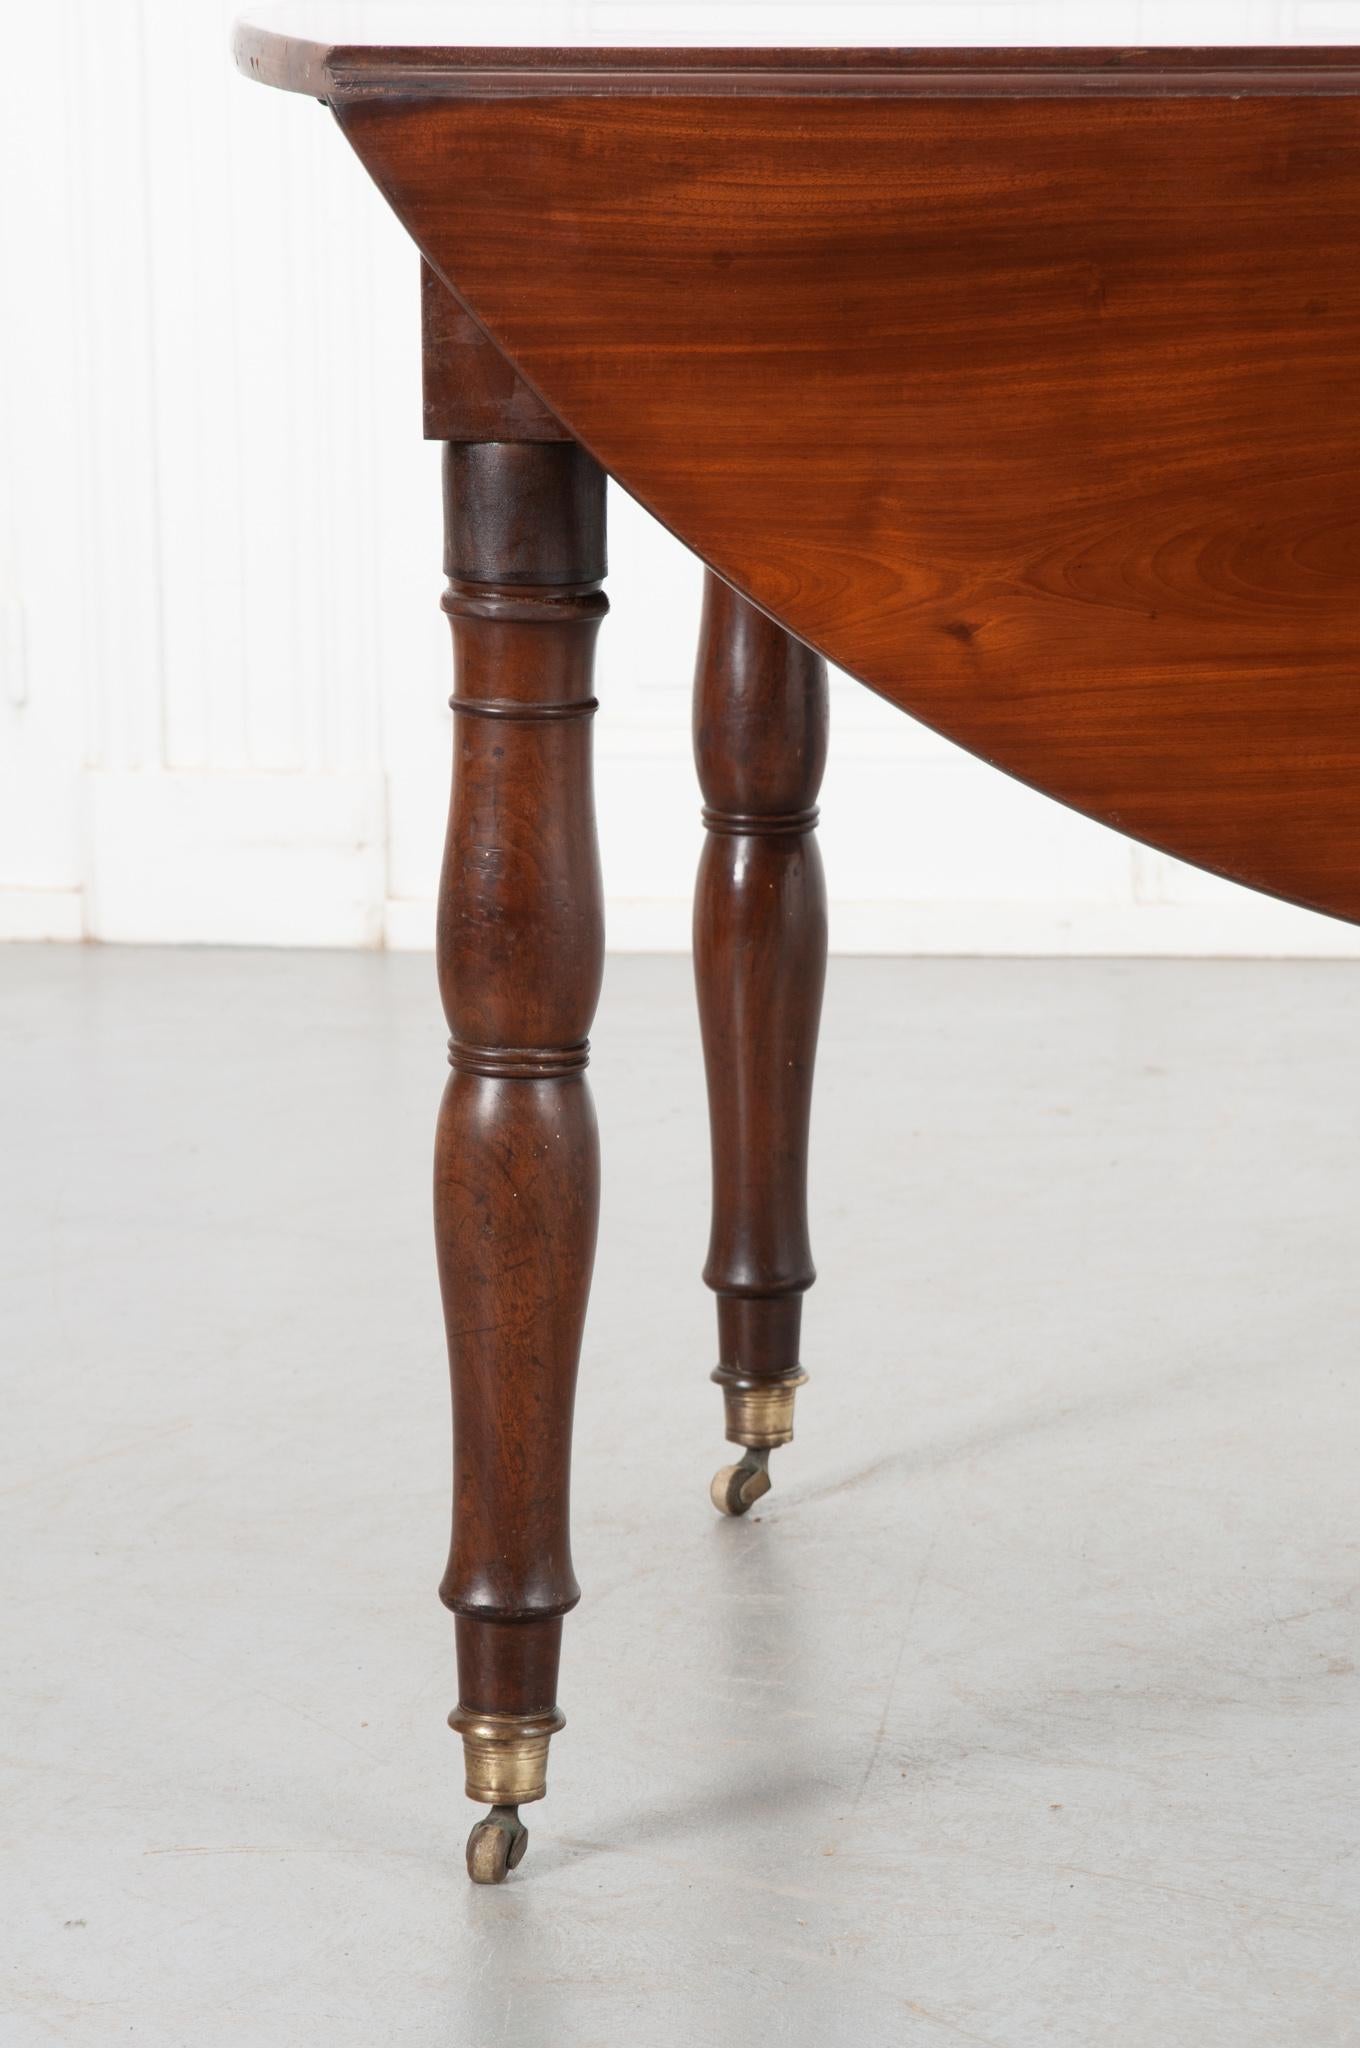 Other French 19th Century Mahogany Drop Leaf Table